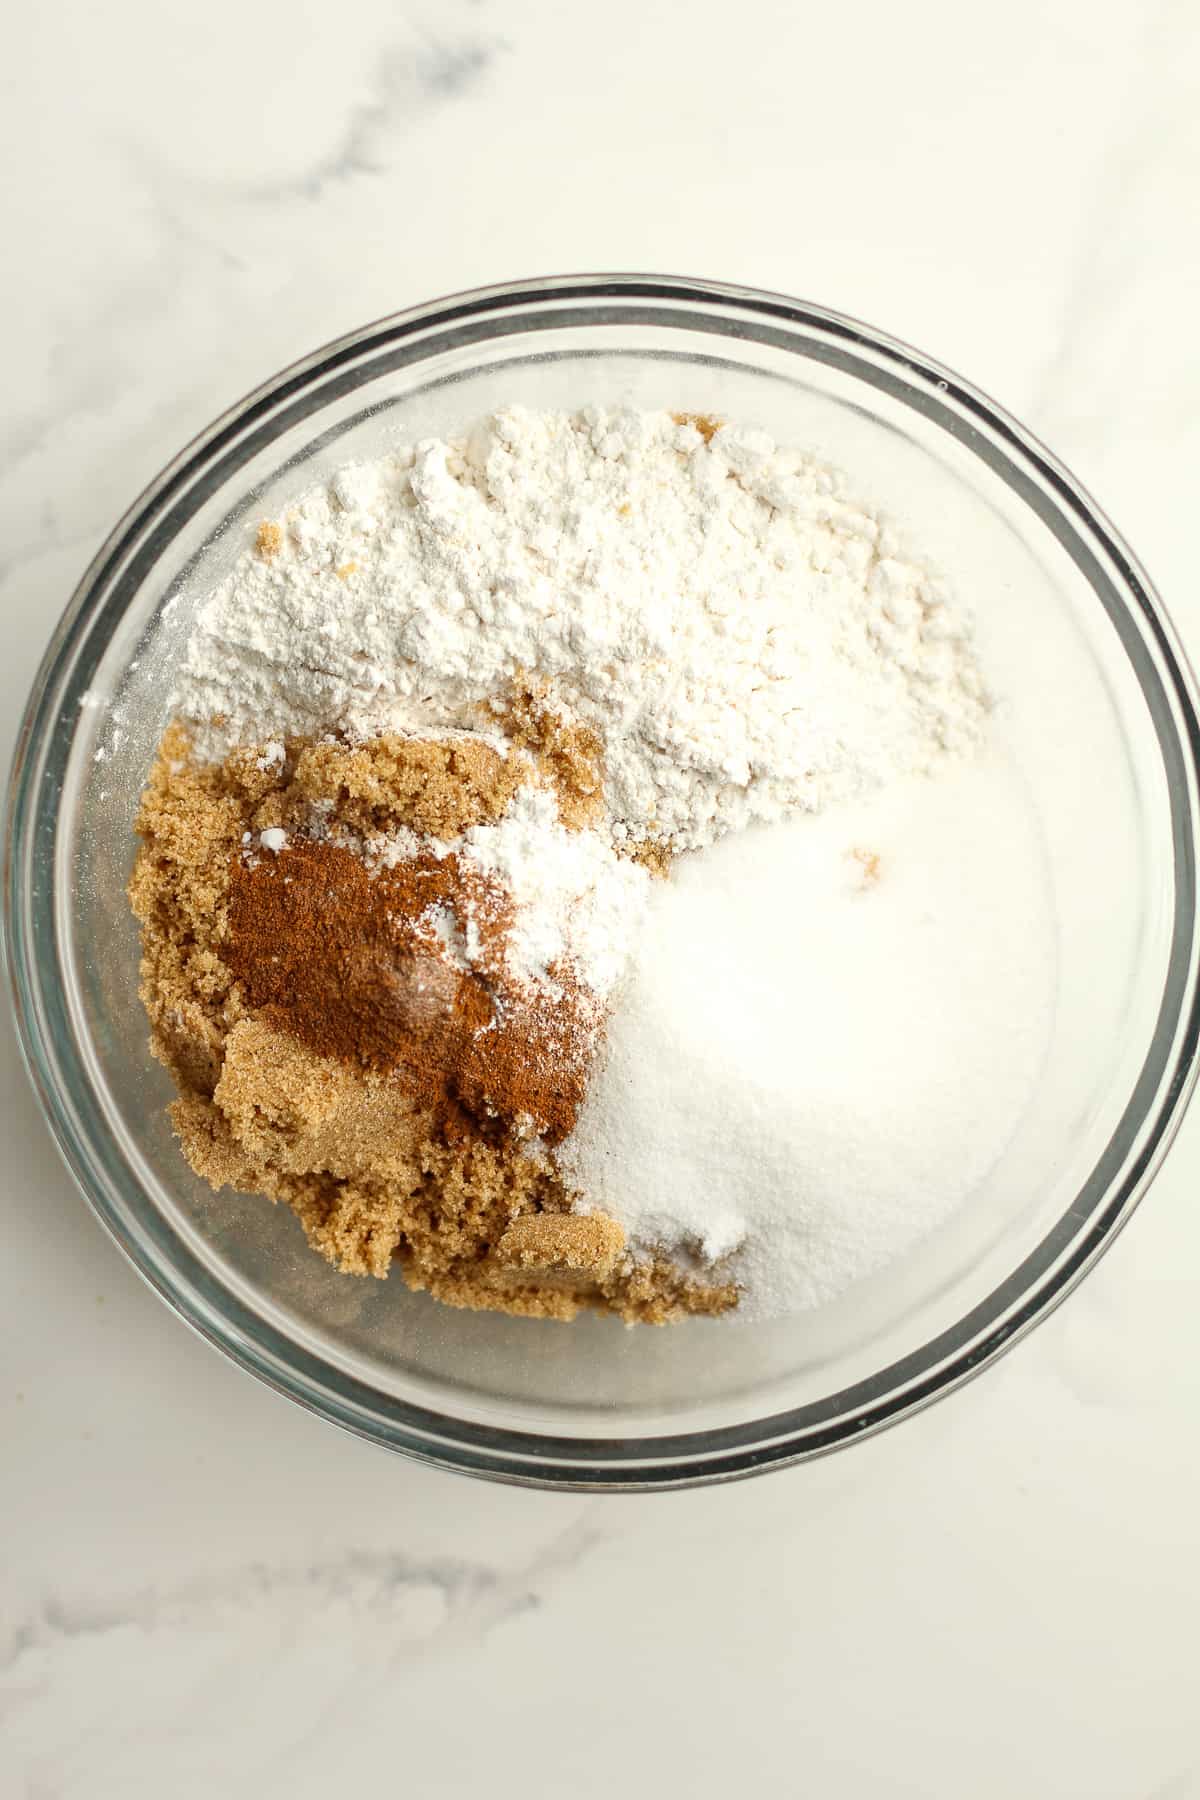 A bowl of the dry ingredients - flour, sugars, spices, etc.